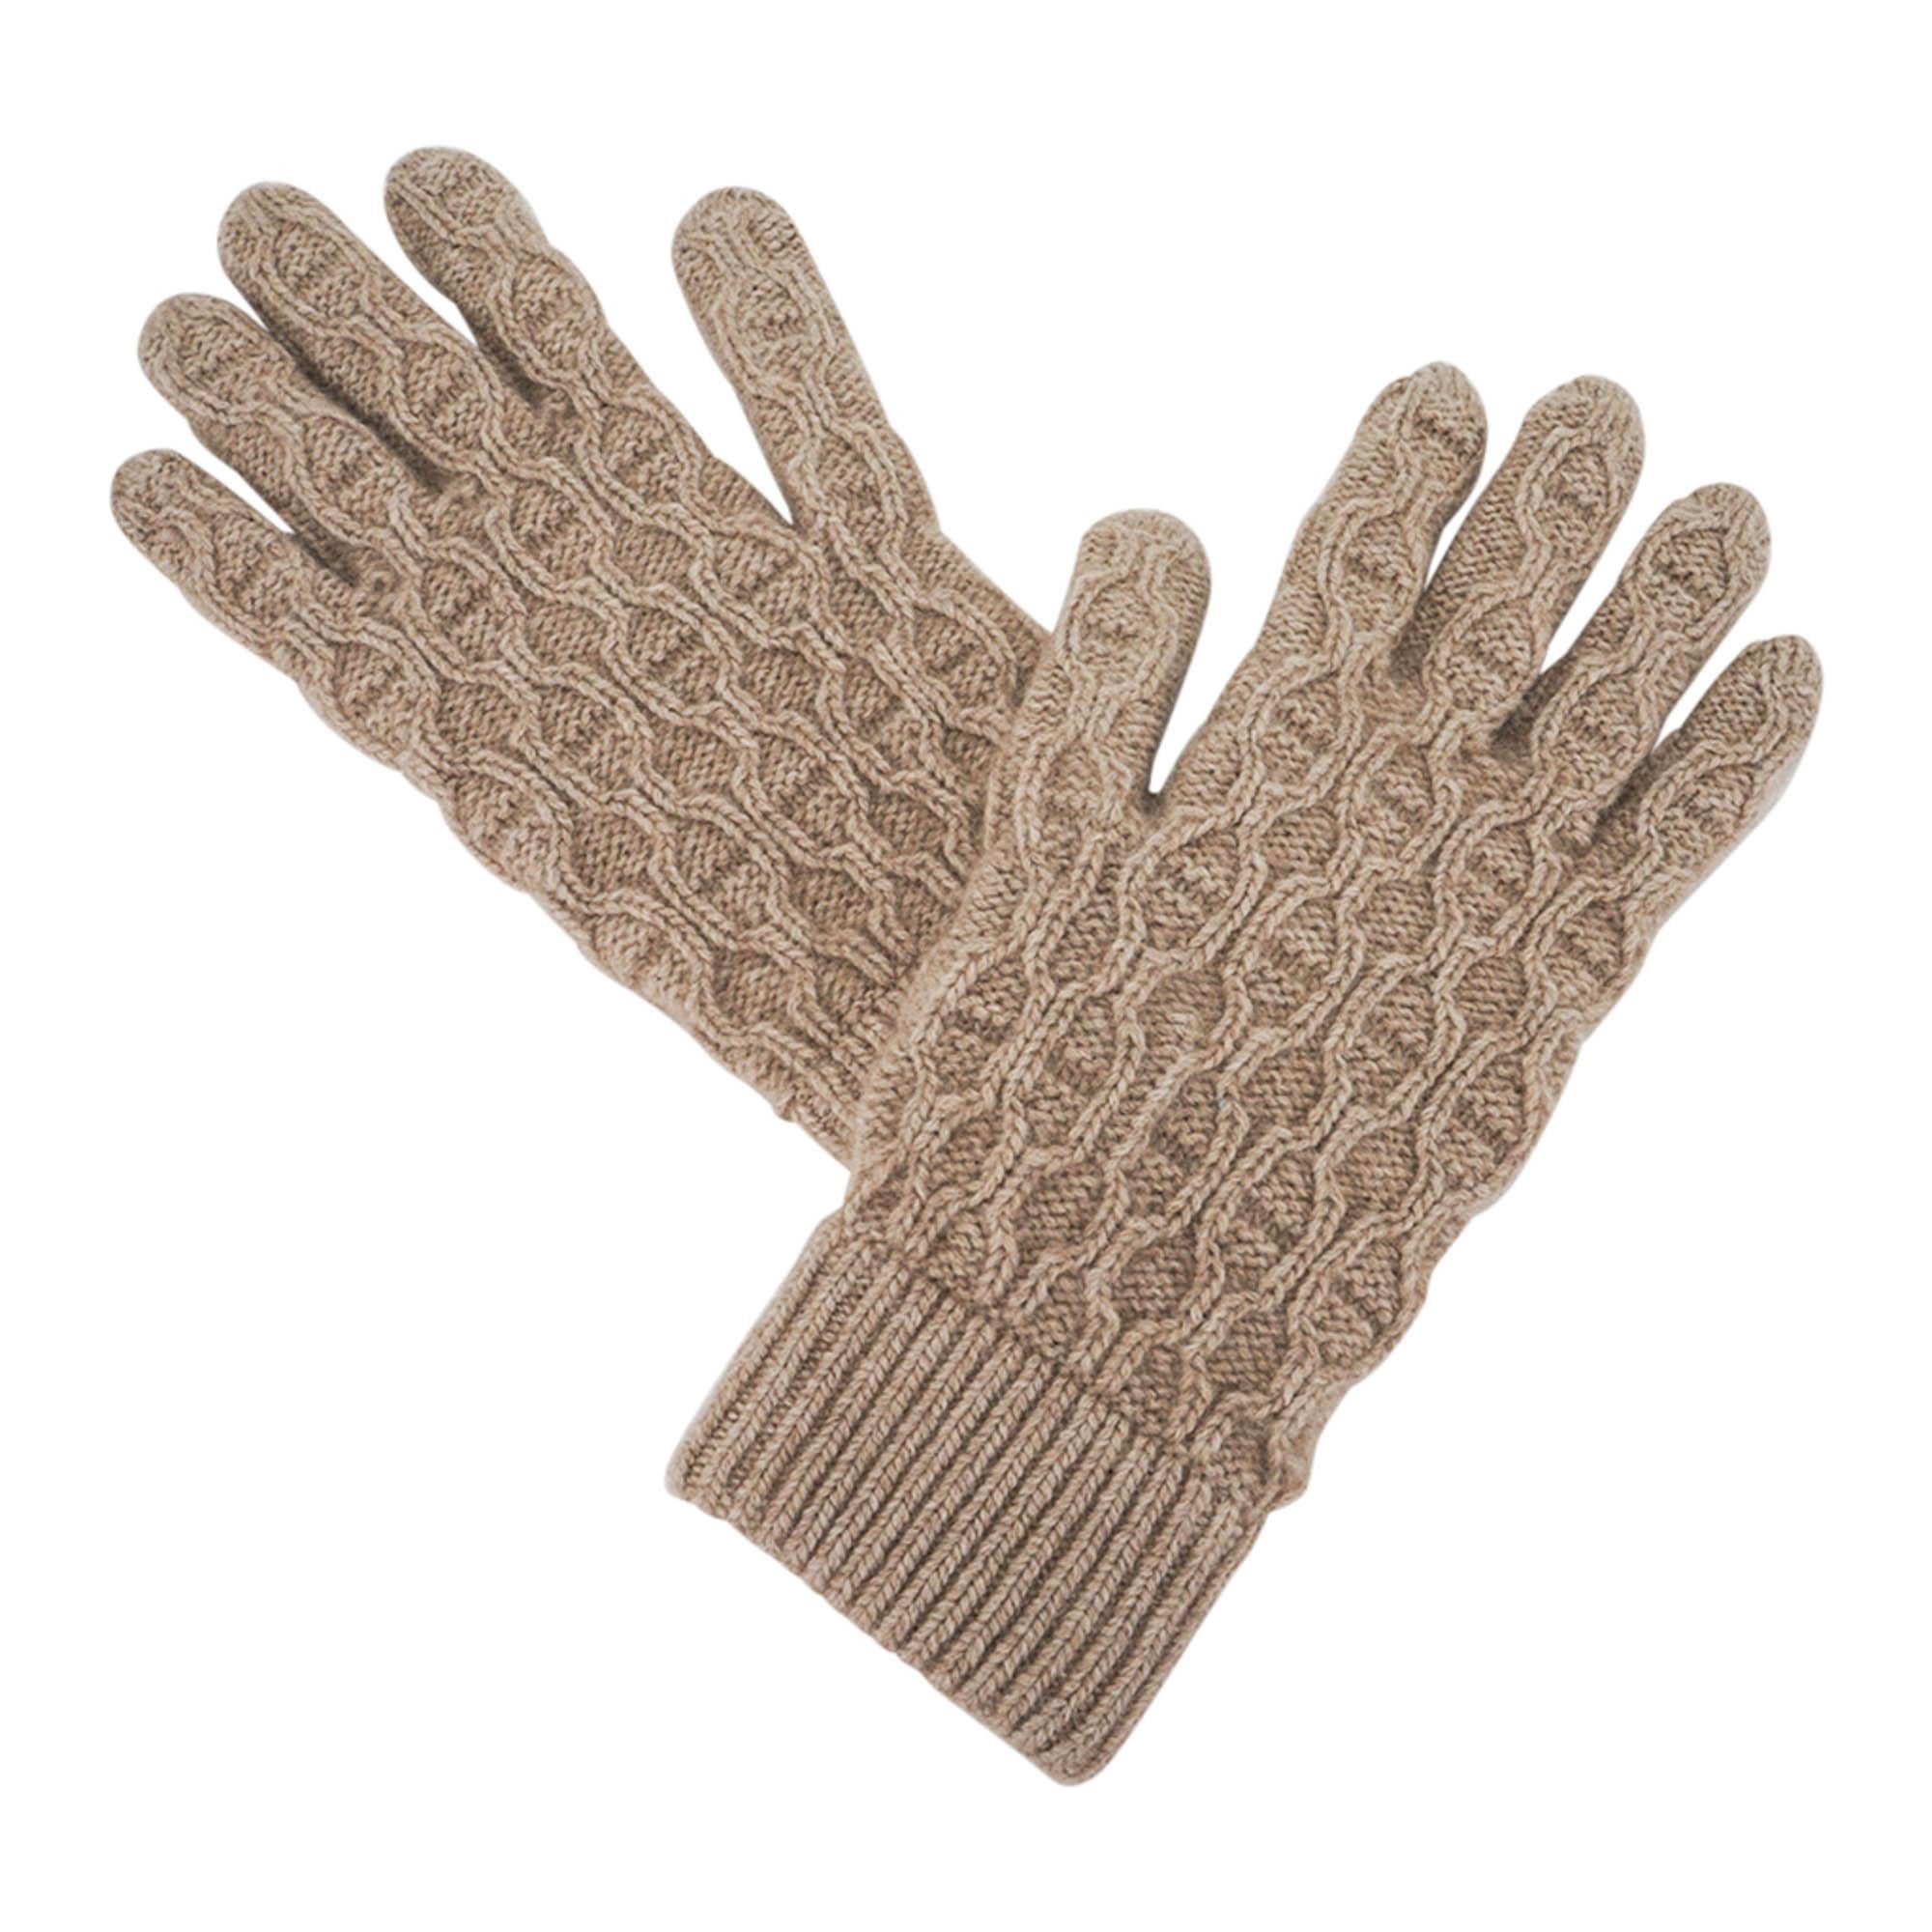 Mightychic offers Hermes Tri Maillon Gloves featured in Beige.
Exquisitely soft and warm Cashmere with chaine d'ancre motif.
Please see the matching Tri Maillon beanie under separate listing.
This listing is for the gloves only.
Fabric is 100%